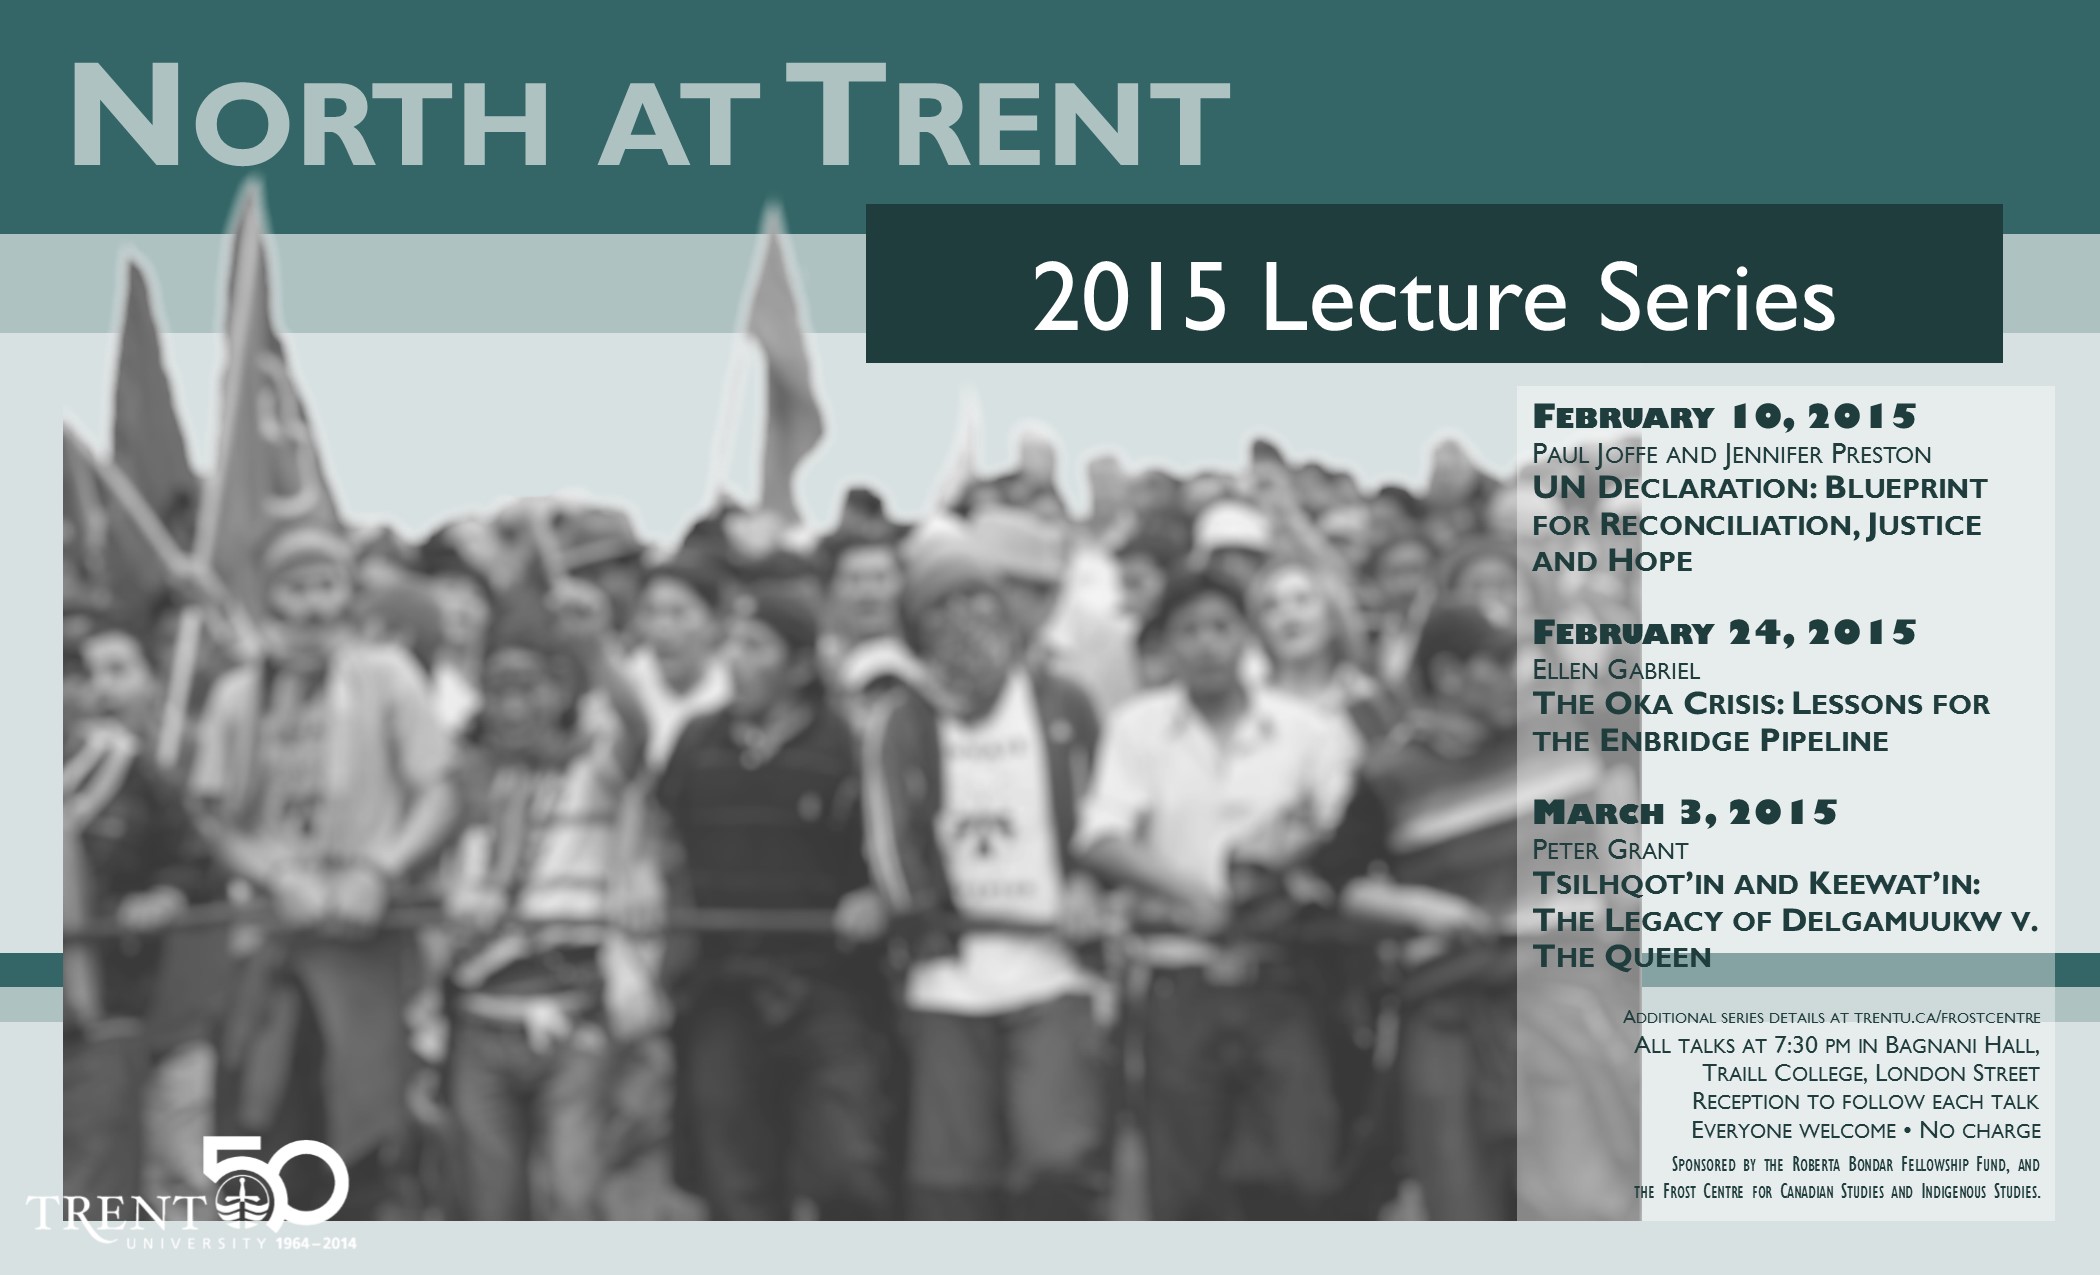 North at Trent 2015 Lecture Series